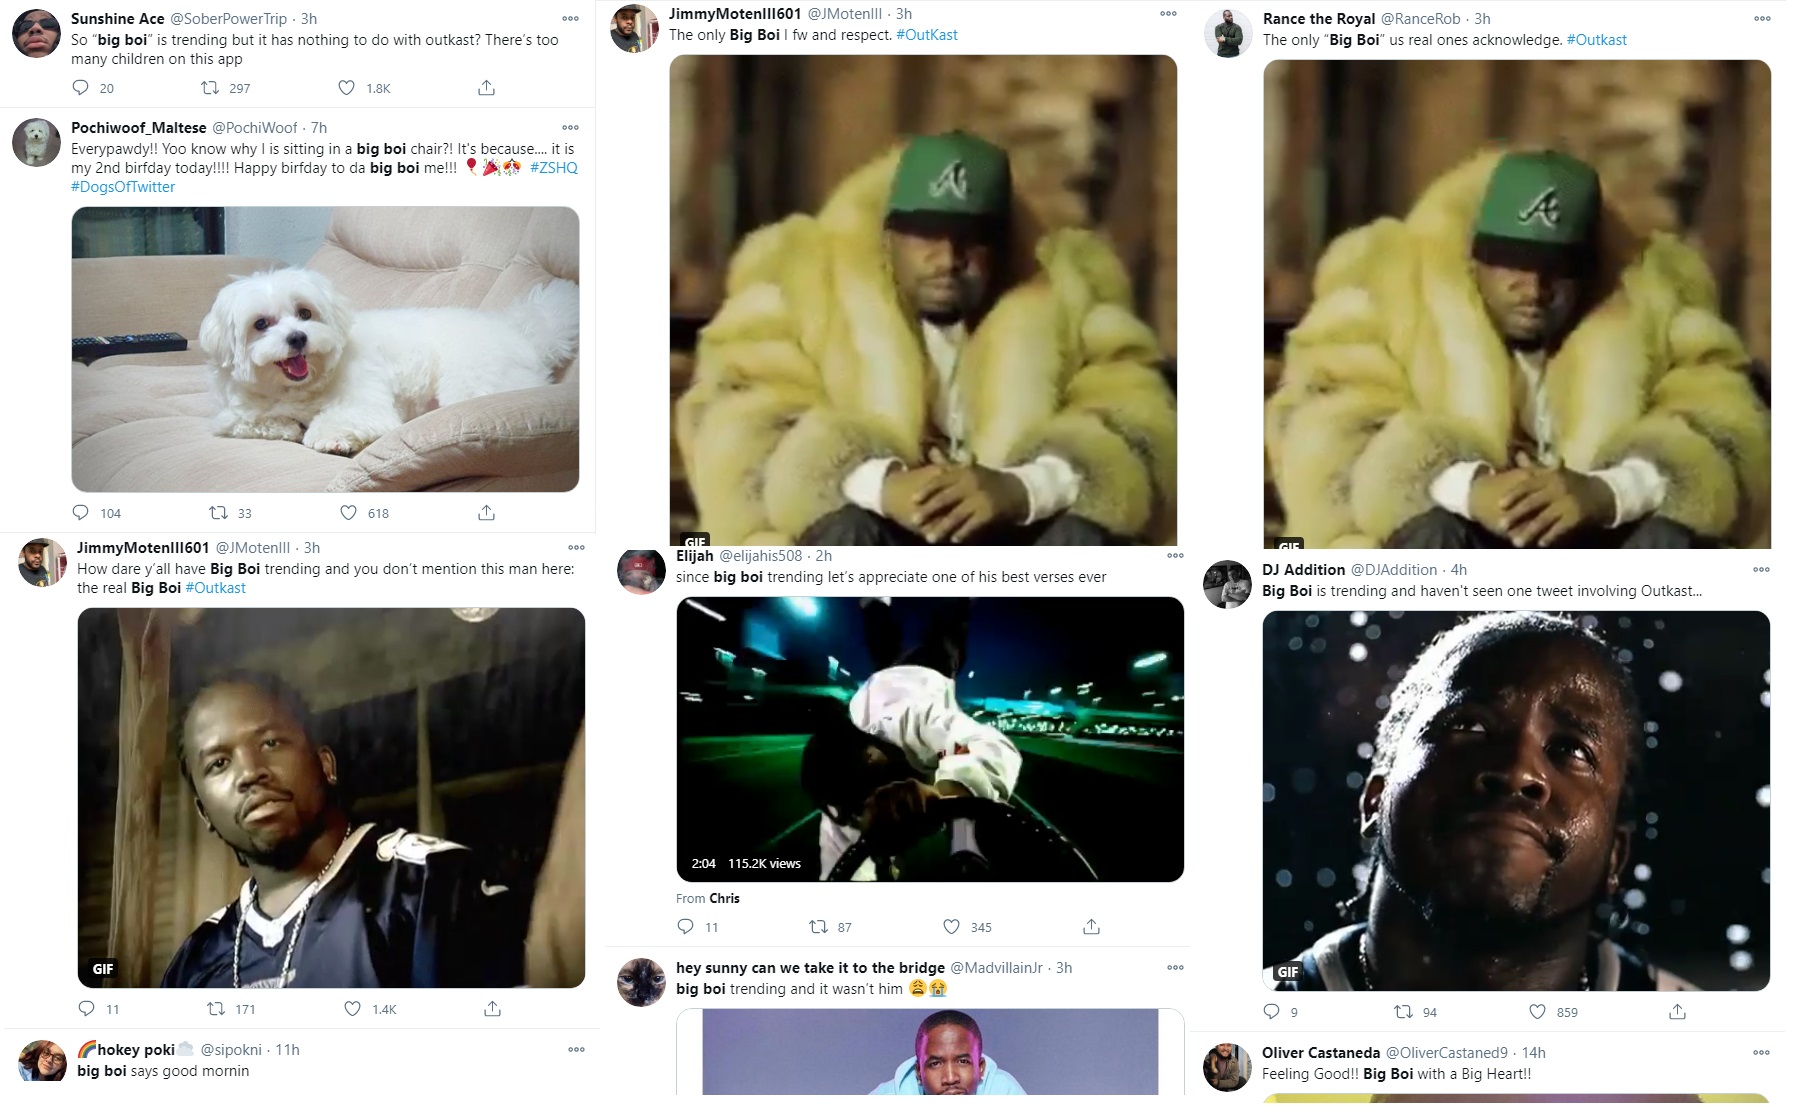 Big Boi trending on Twitter nothing to do with Outkast